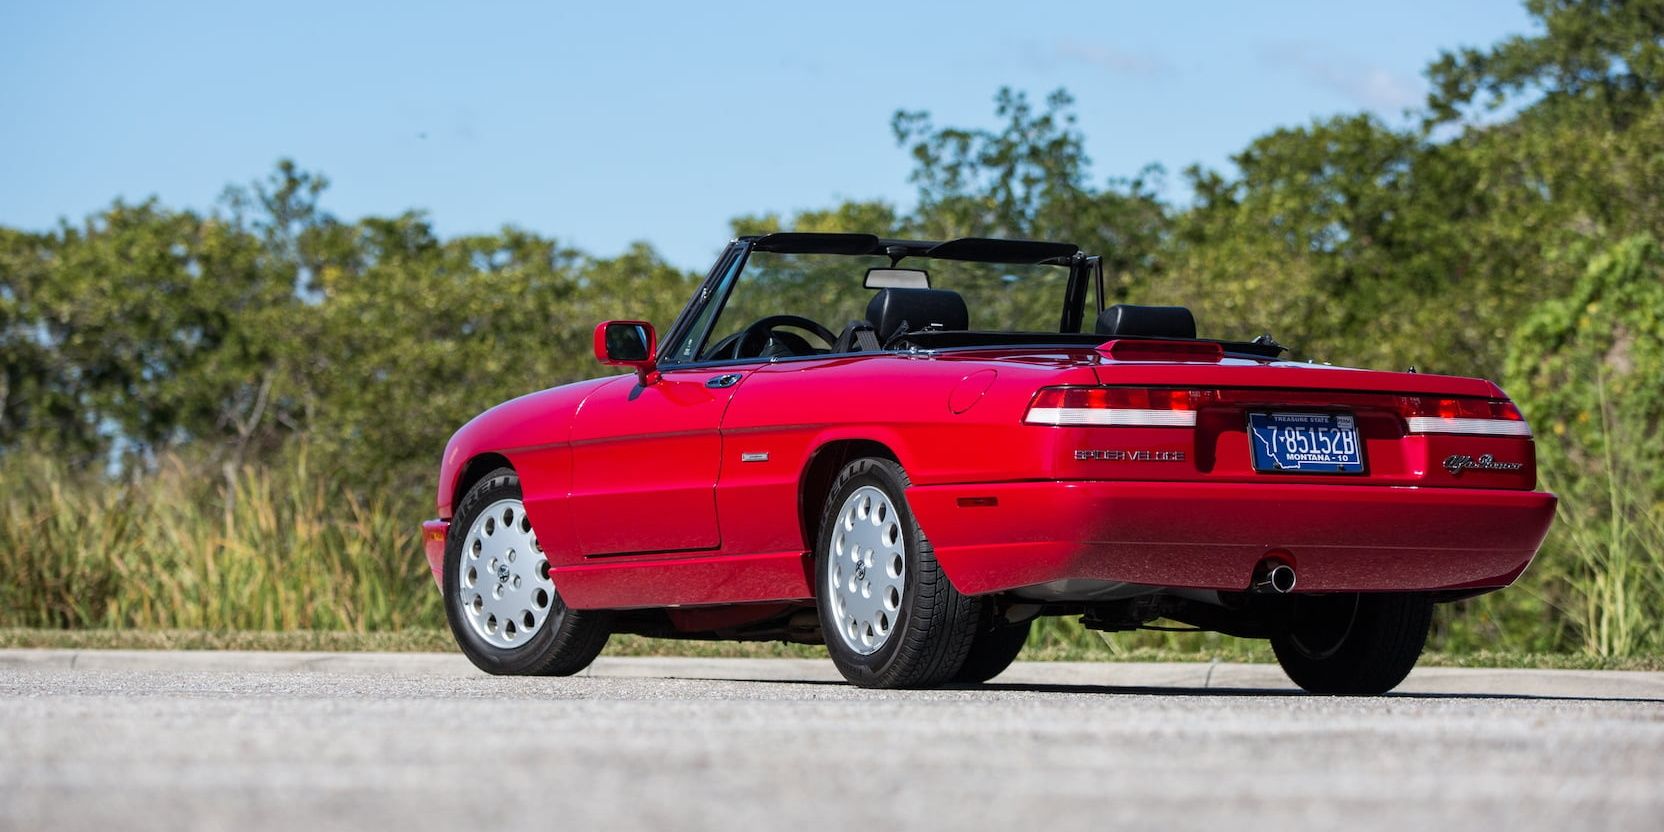 Alfa Romeo Spider S4 red sports car parked